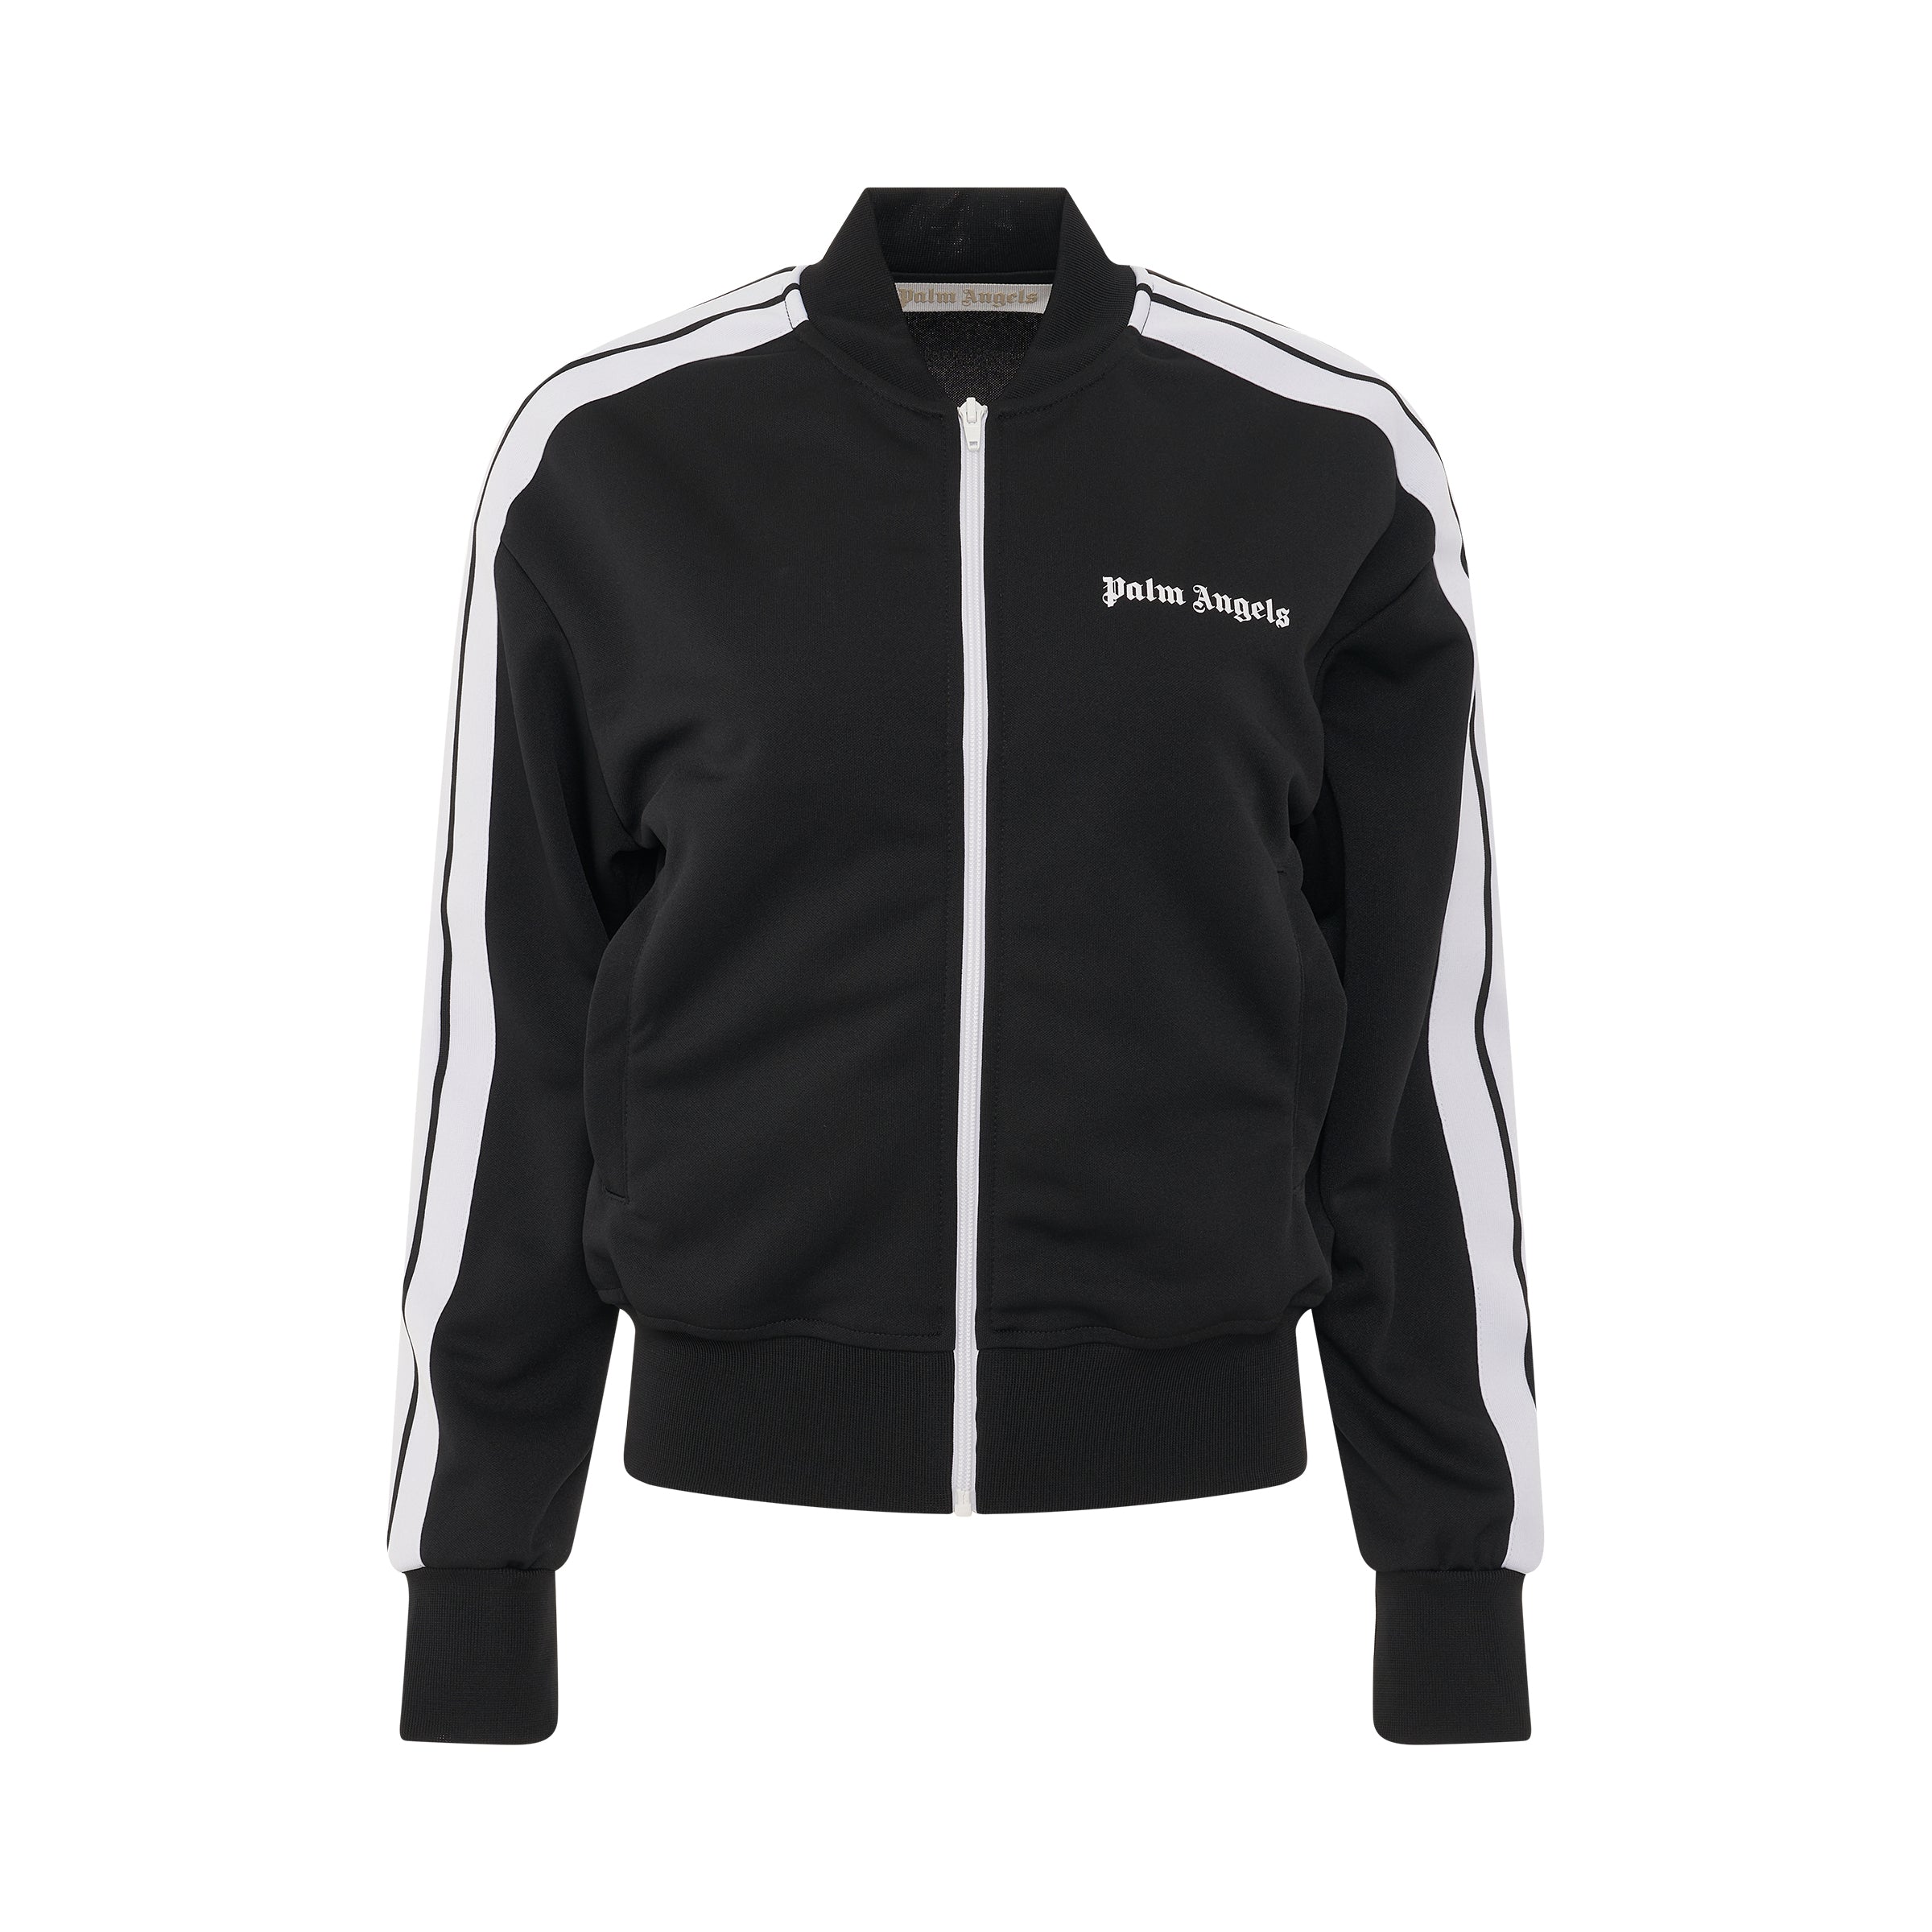 palm angels bomber track jacket in black white sold out sold out sale ...